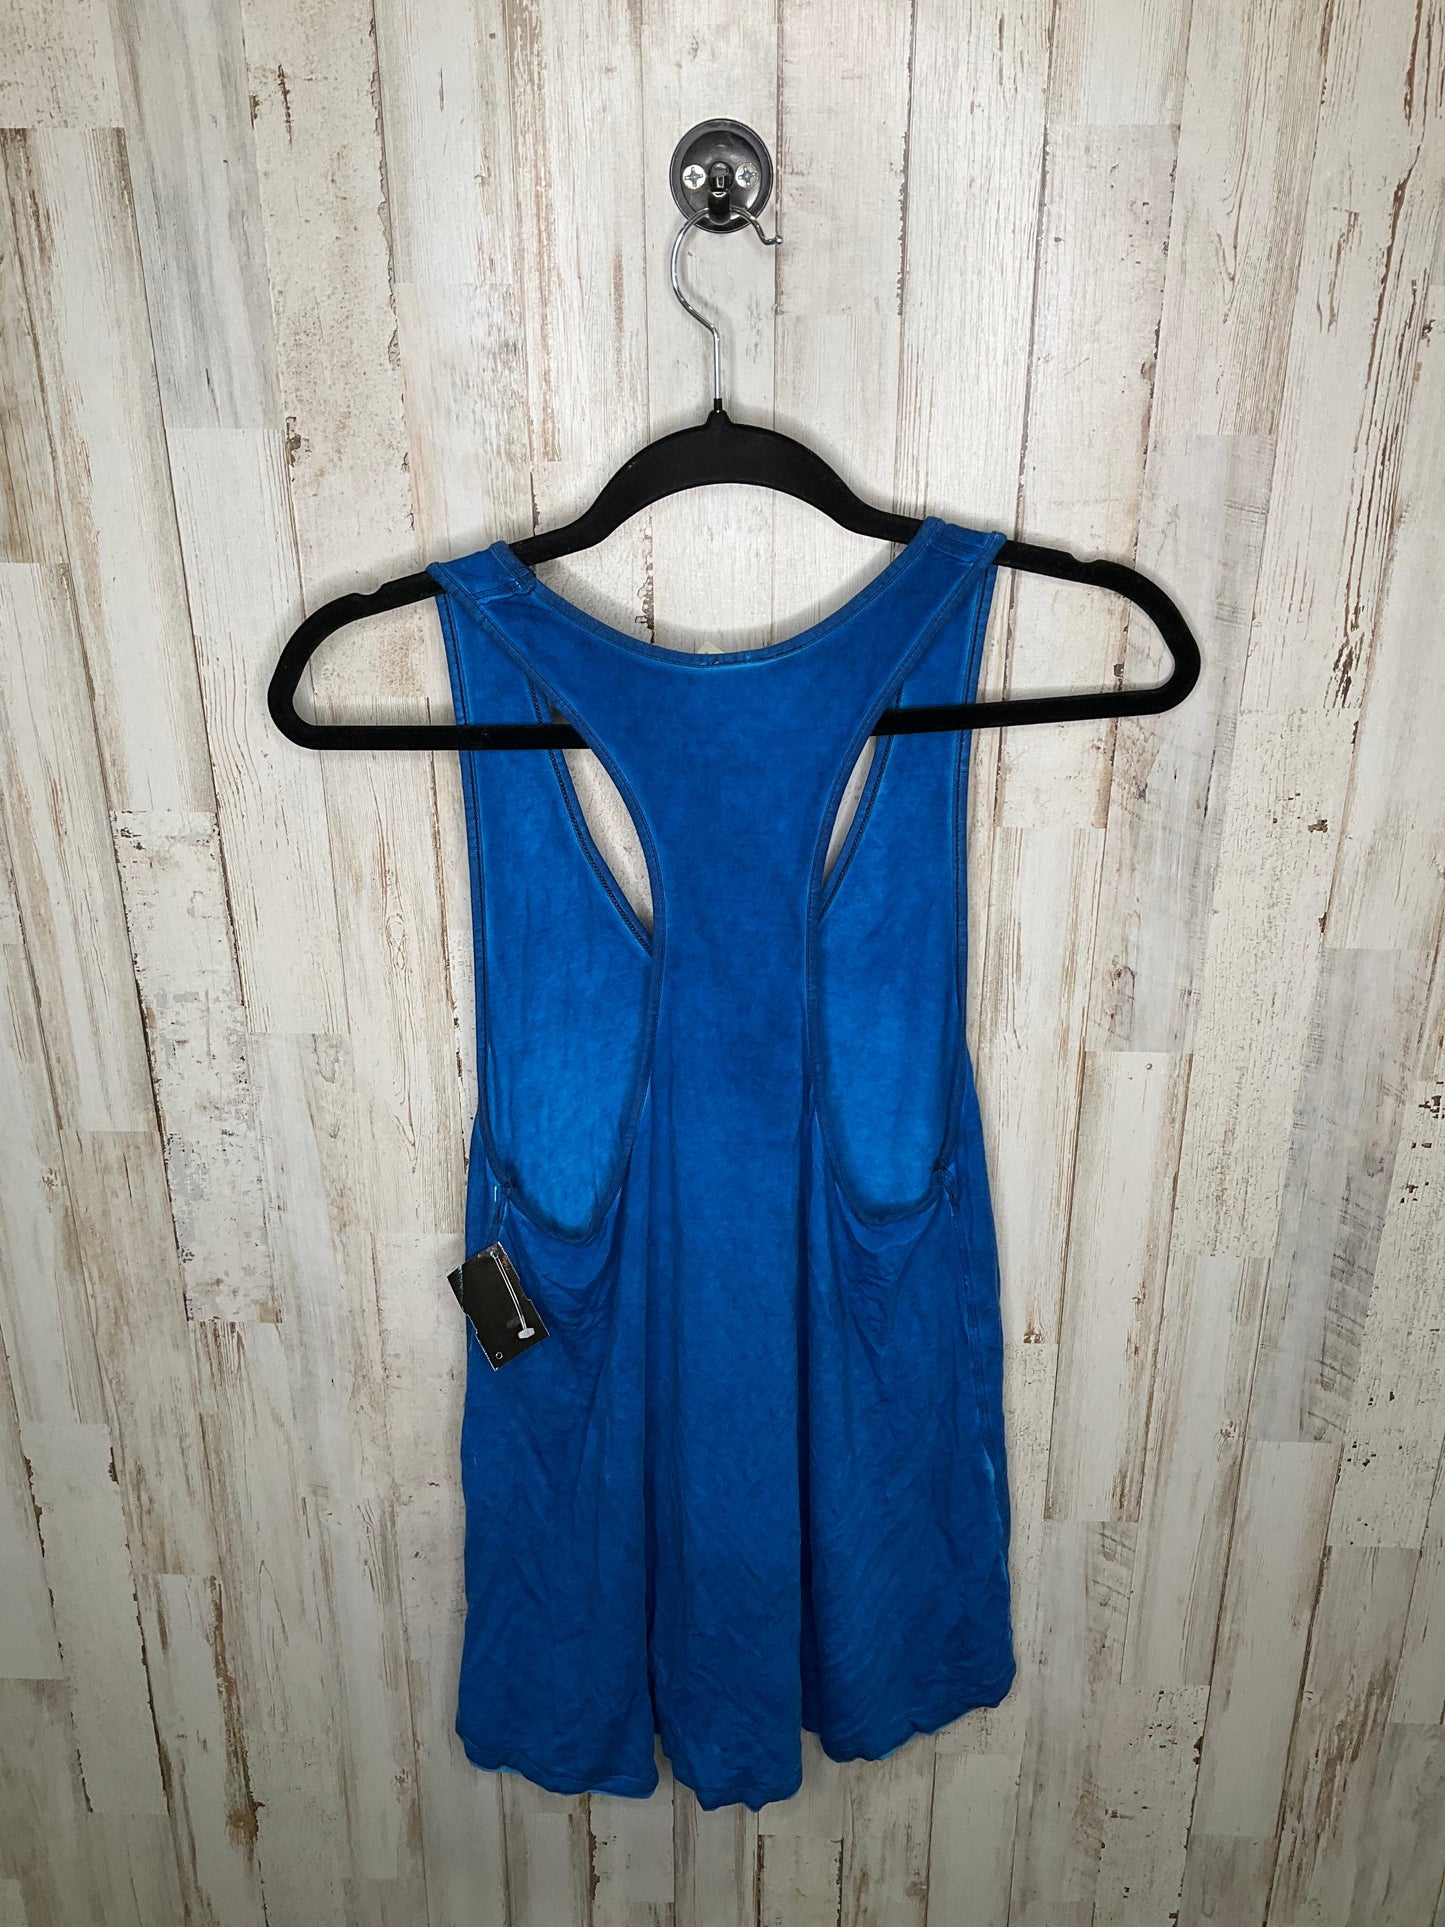 Blue Top Sleeveless We The Free, Size S